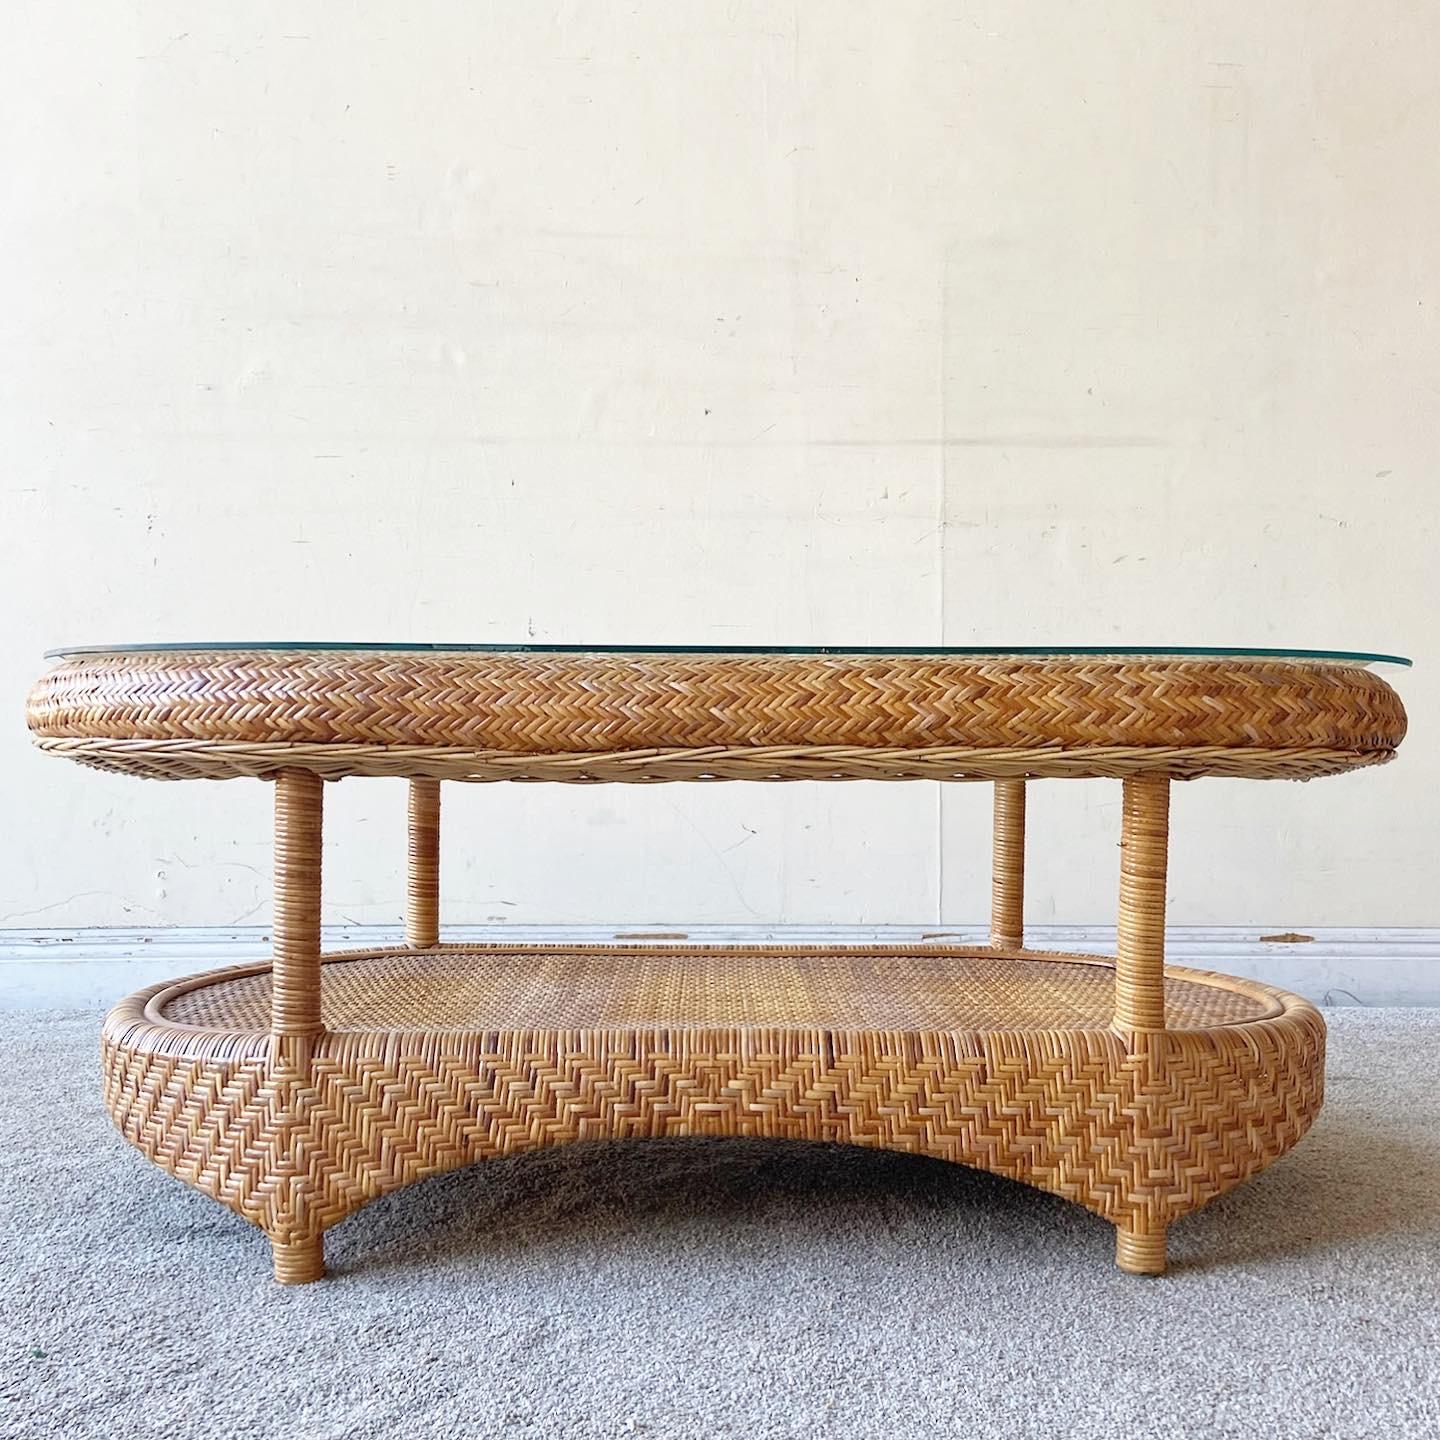 Exceptional vintage boho chic glass top coffee table. Features wicker weaving throughout the entire table surface.
  